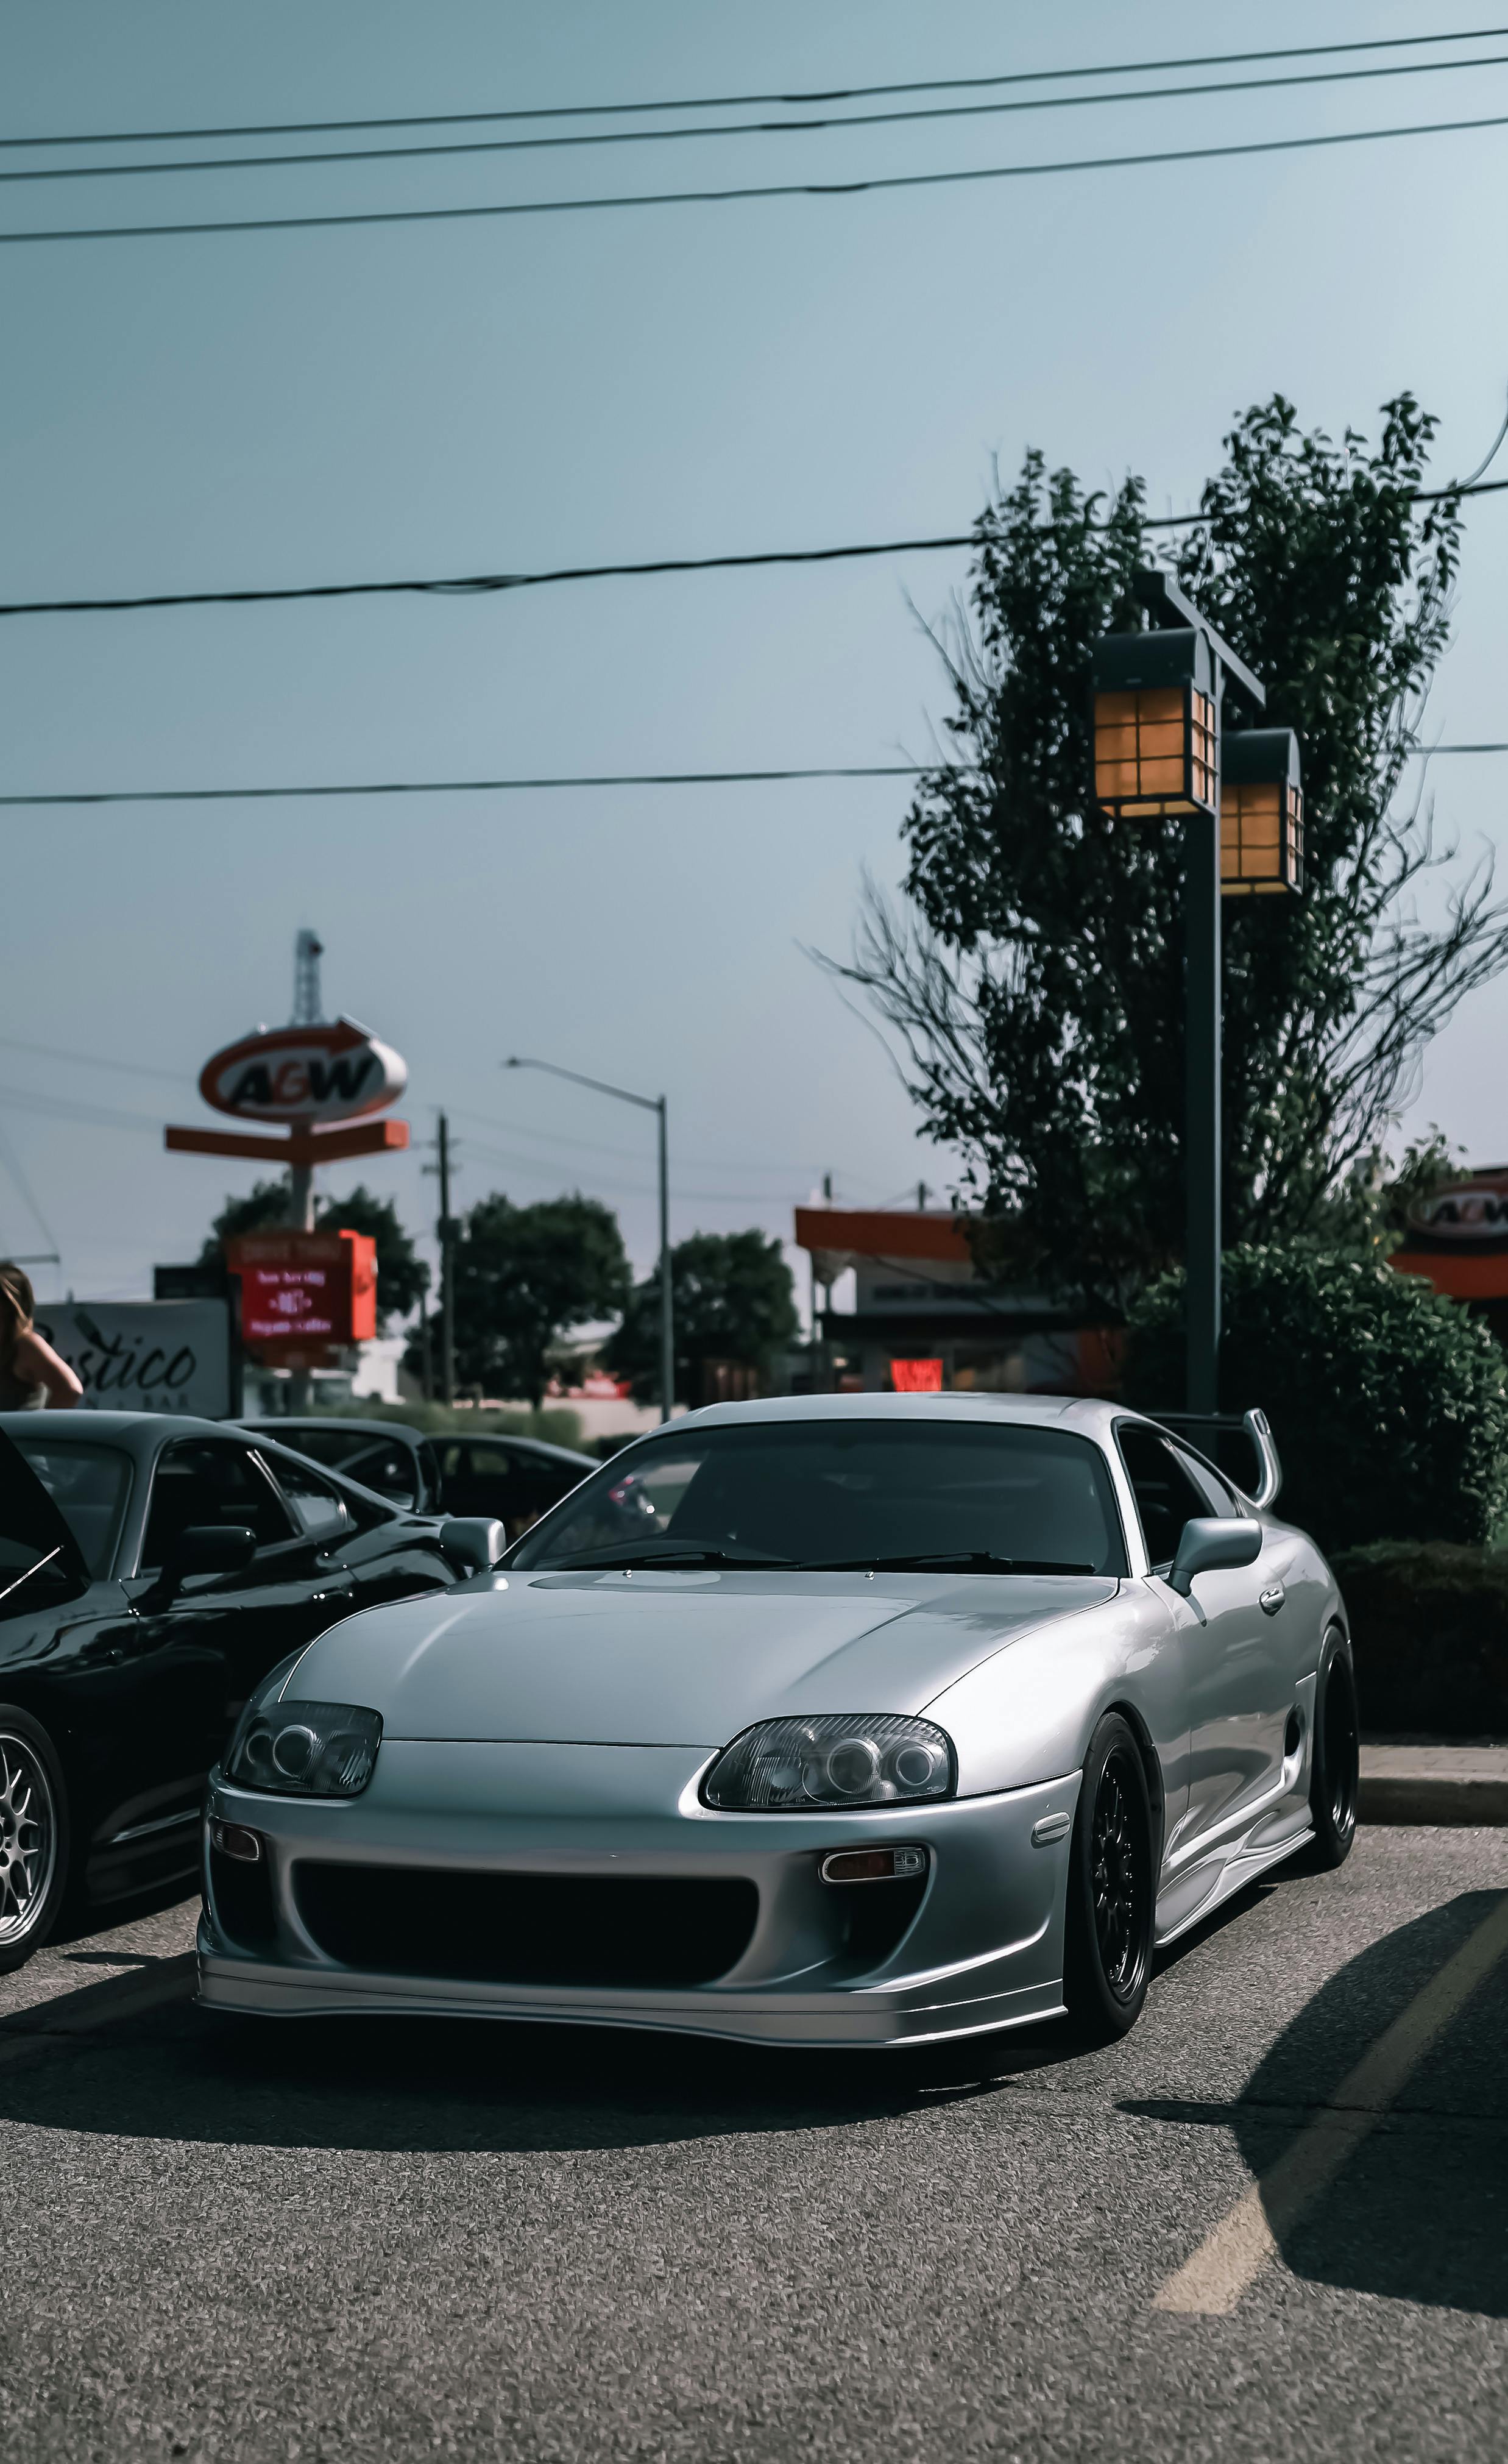 750x1334 Toyota Supra Wallpapers for Apple IPhone 6 6S 7 8 Retina HD